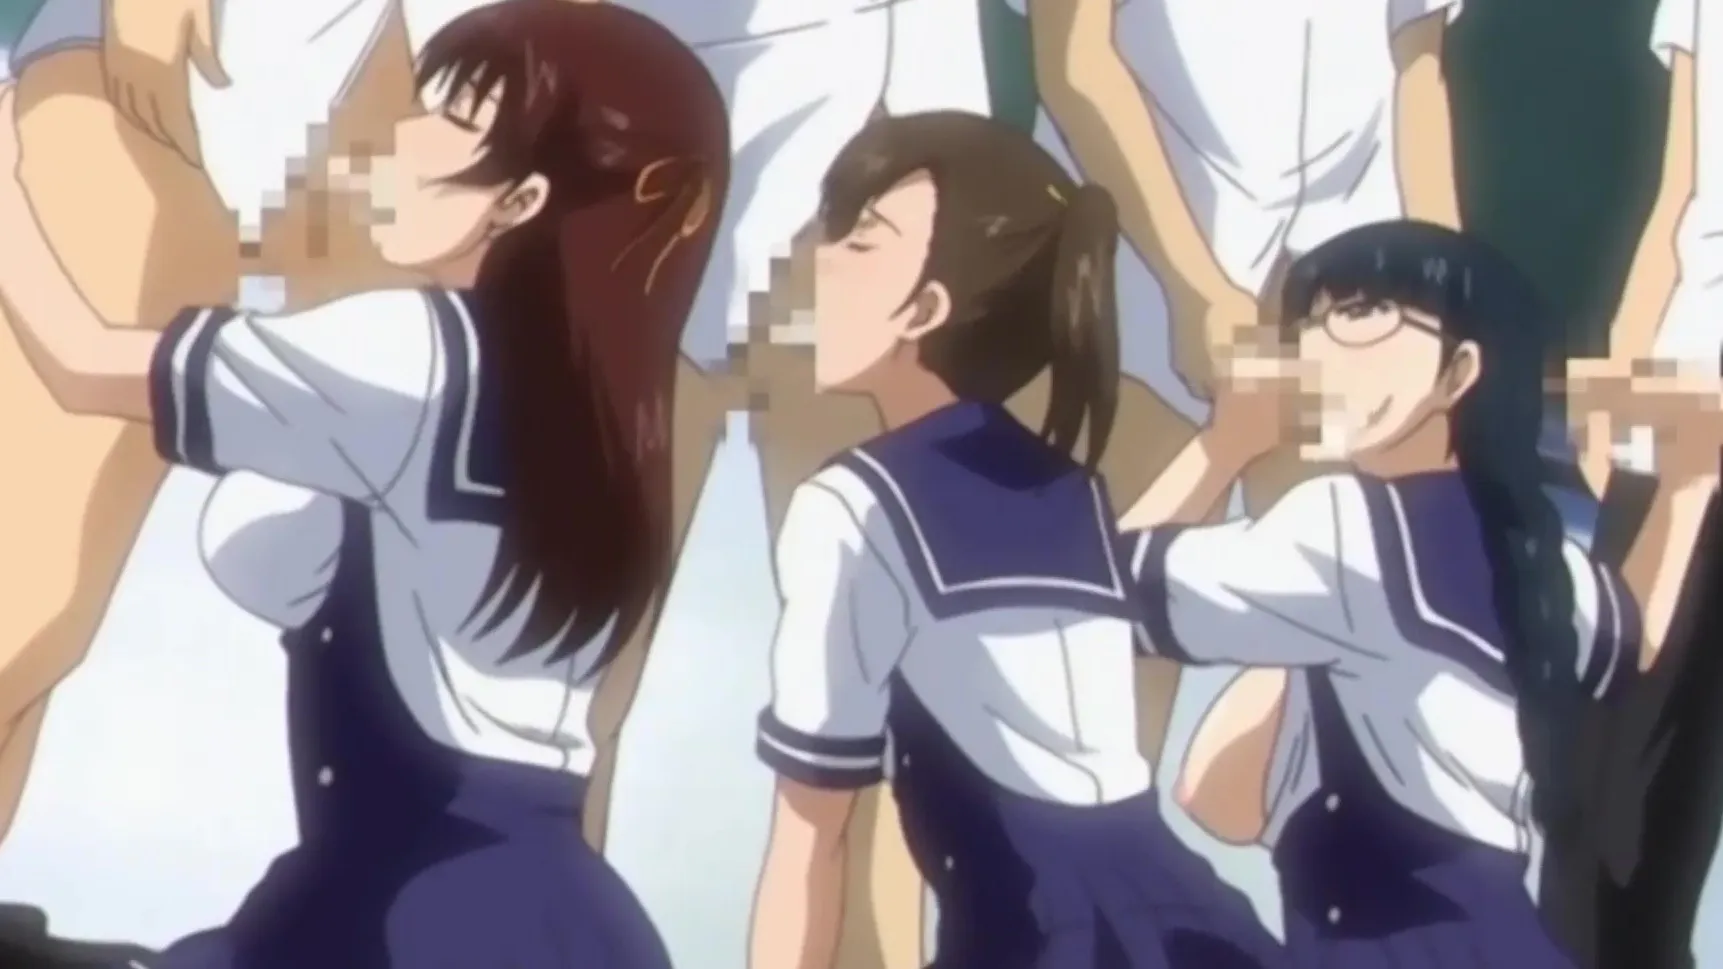 Public Group Sex Hentai - Hentai school girls know how to please their cocky classmates